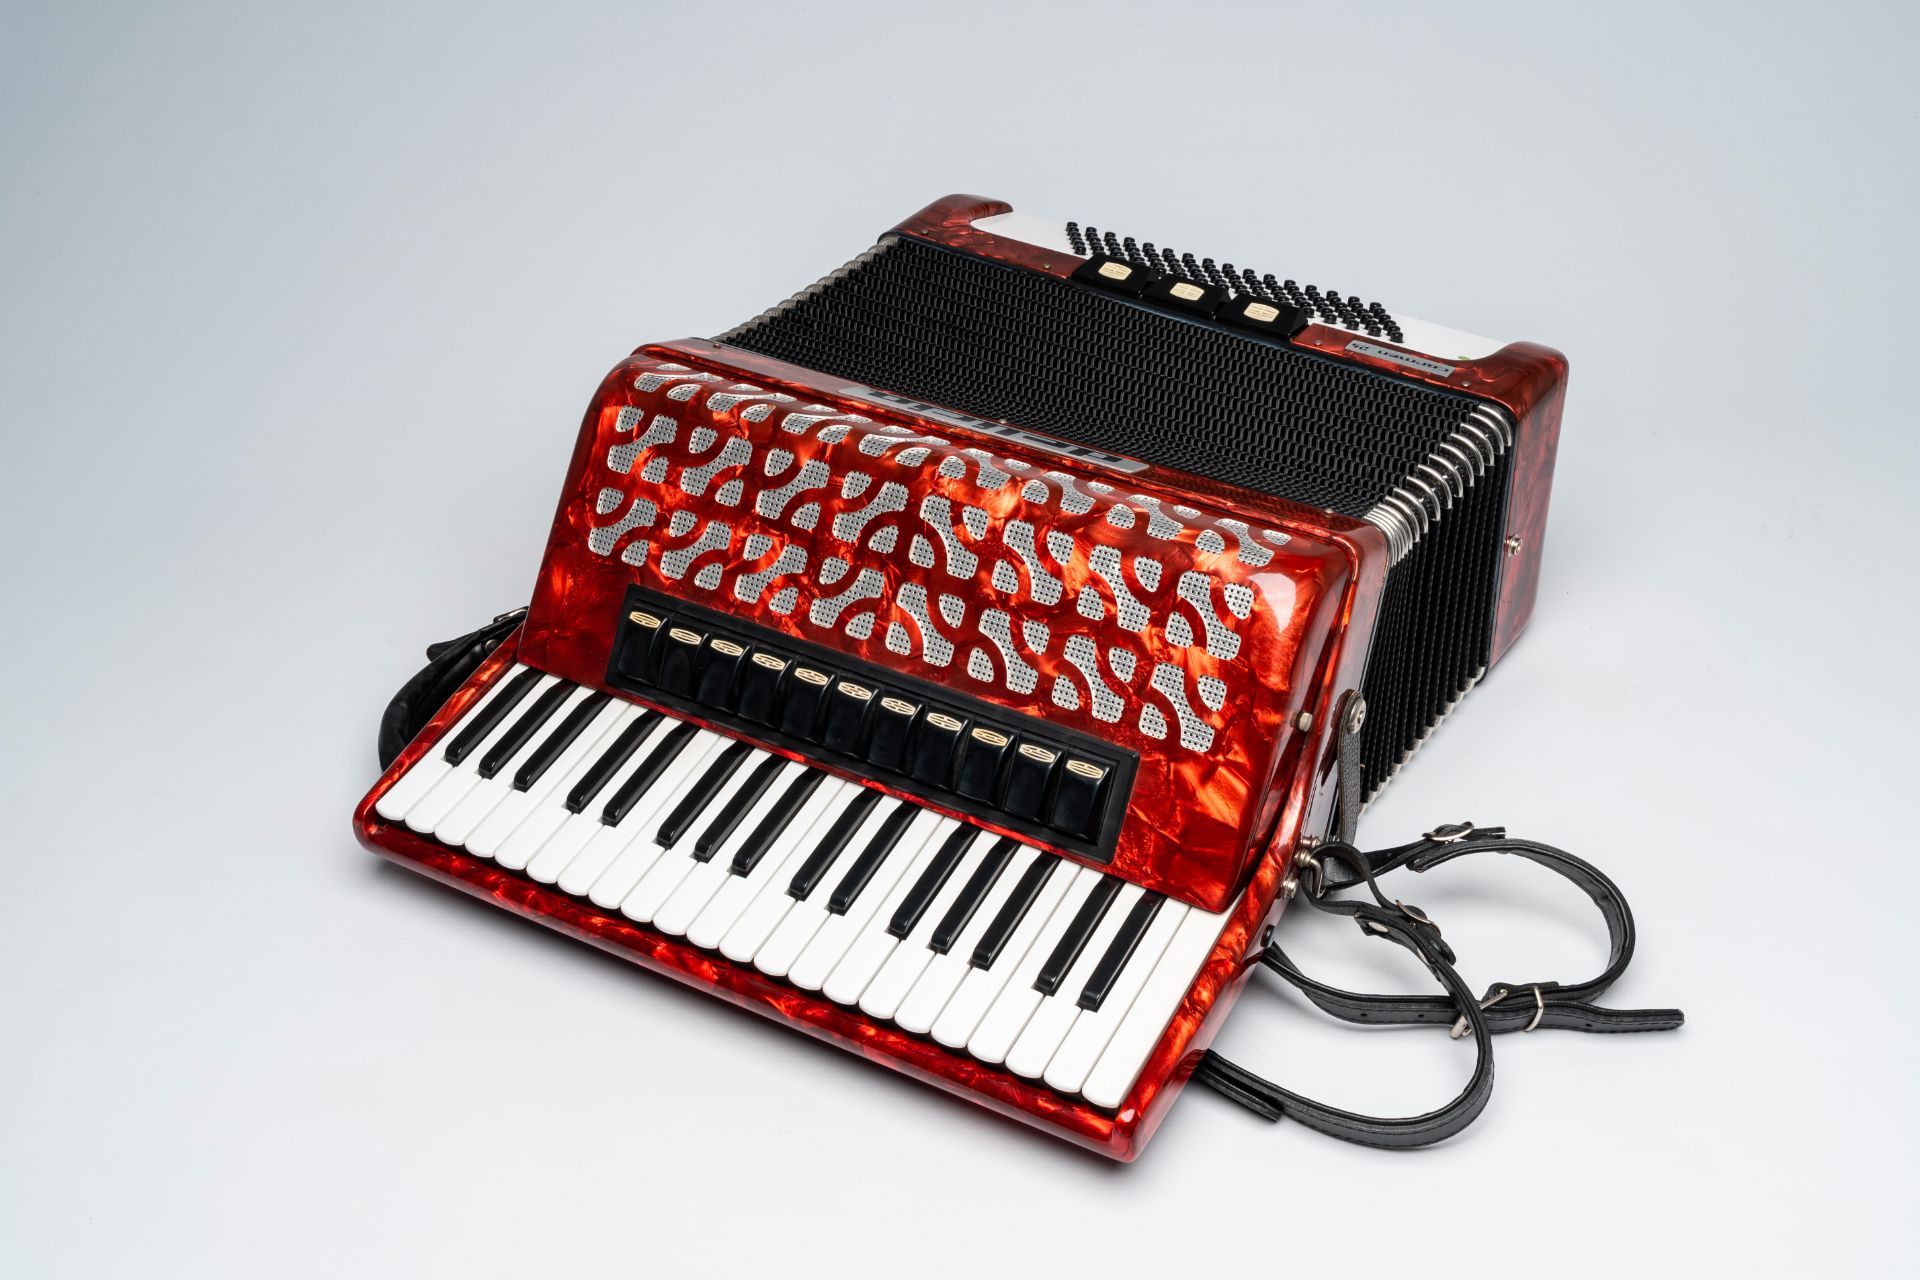 A Czech 'Delicia' chromatic accordion with piano keyboard and box, ca. 1990 - Image 5 of 6